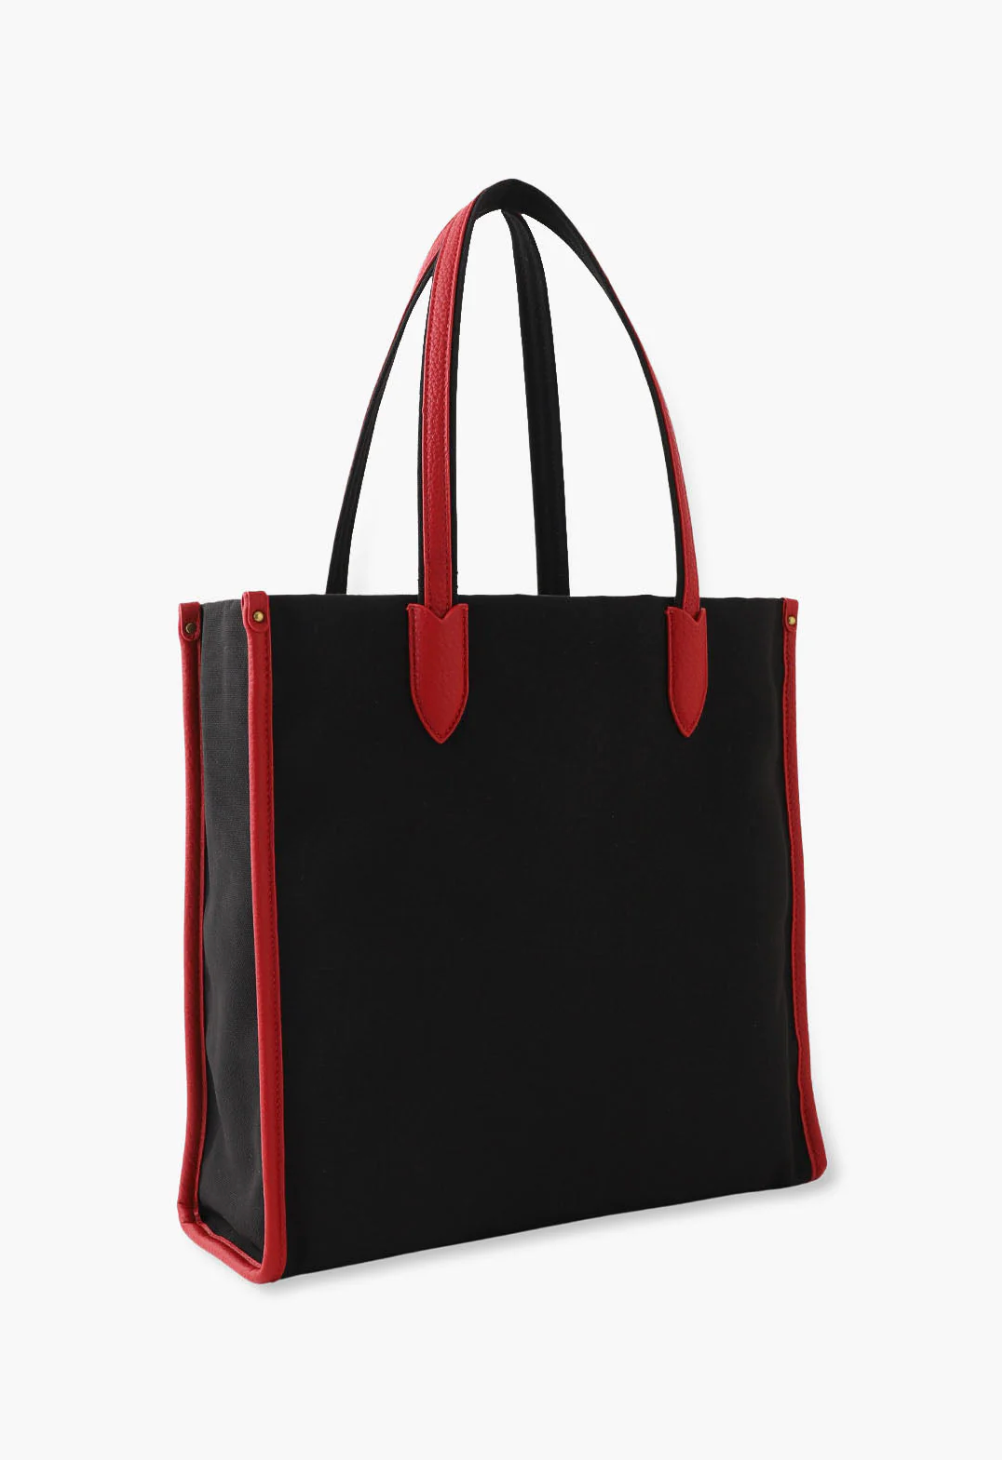 Peacock Fantasy Tote Bag, back is in plain black, handles and hems are in red